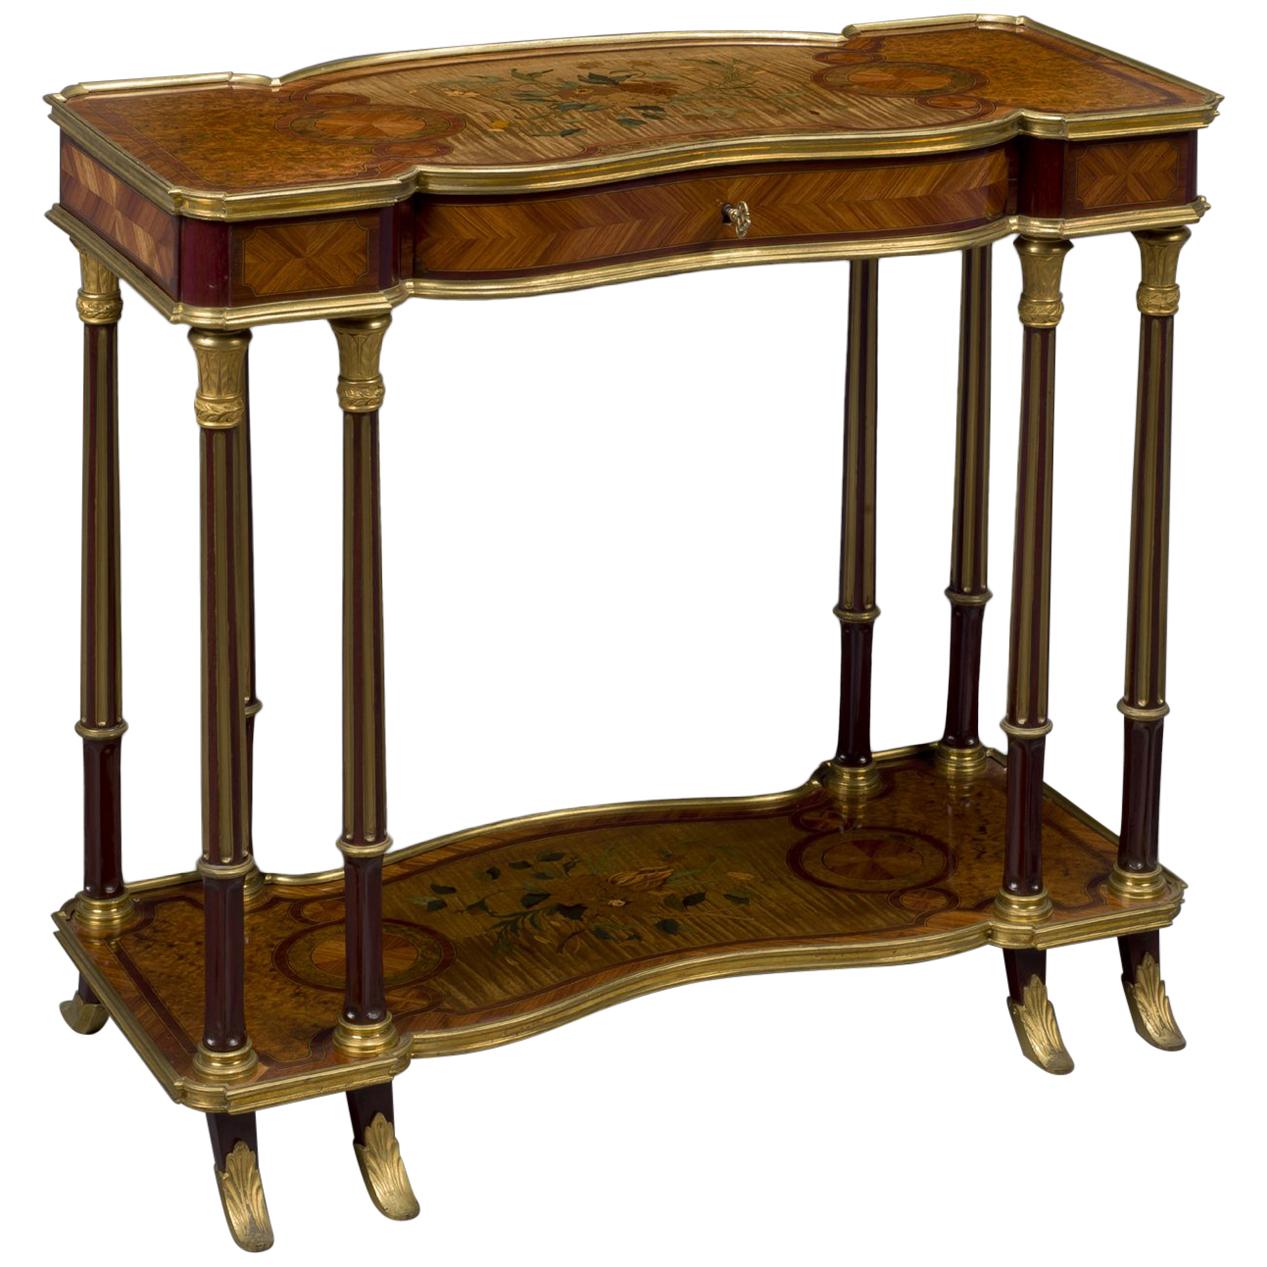 Transitional Style Low Side Table, Attributed to Maison Krieger, circa 1880